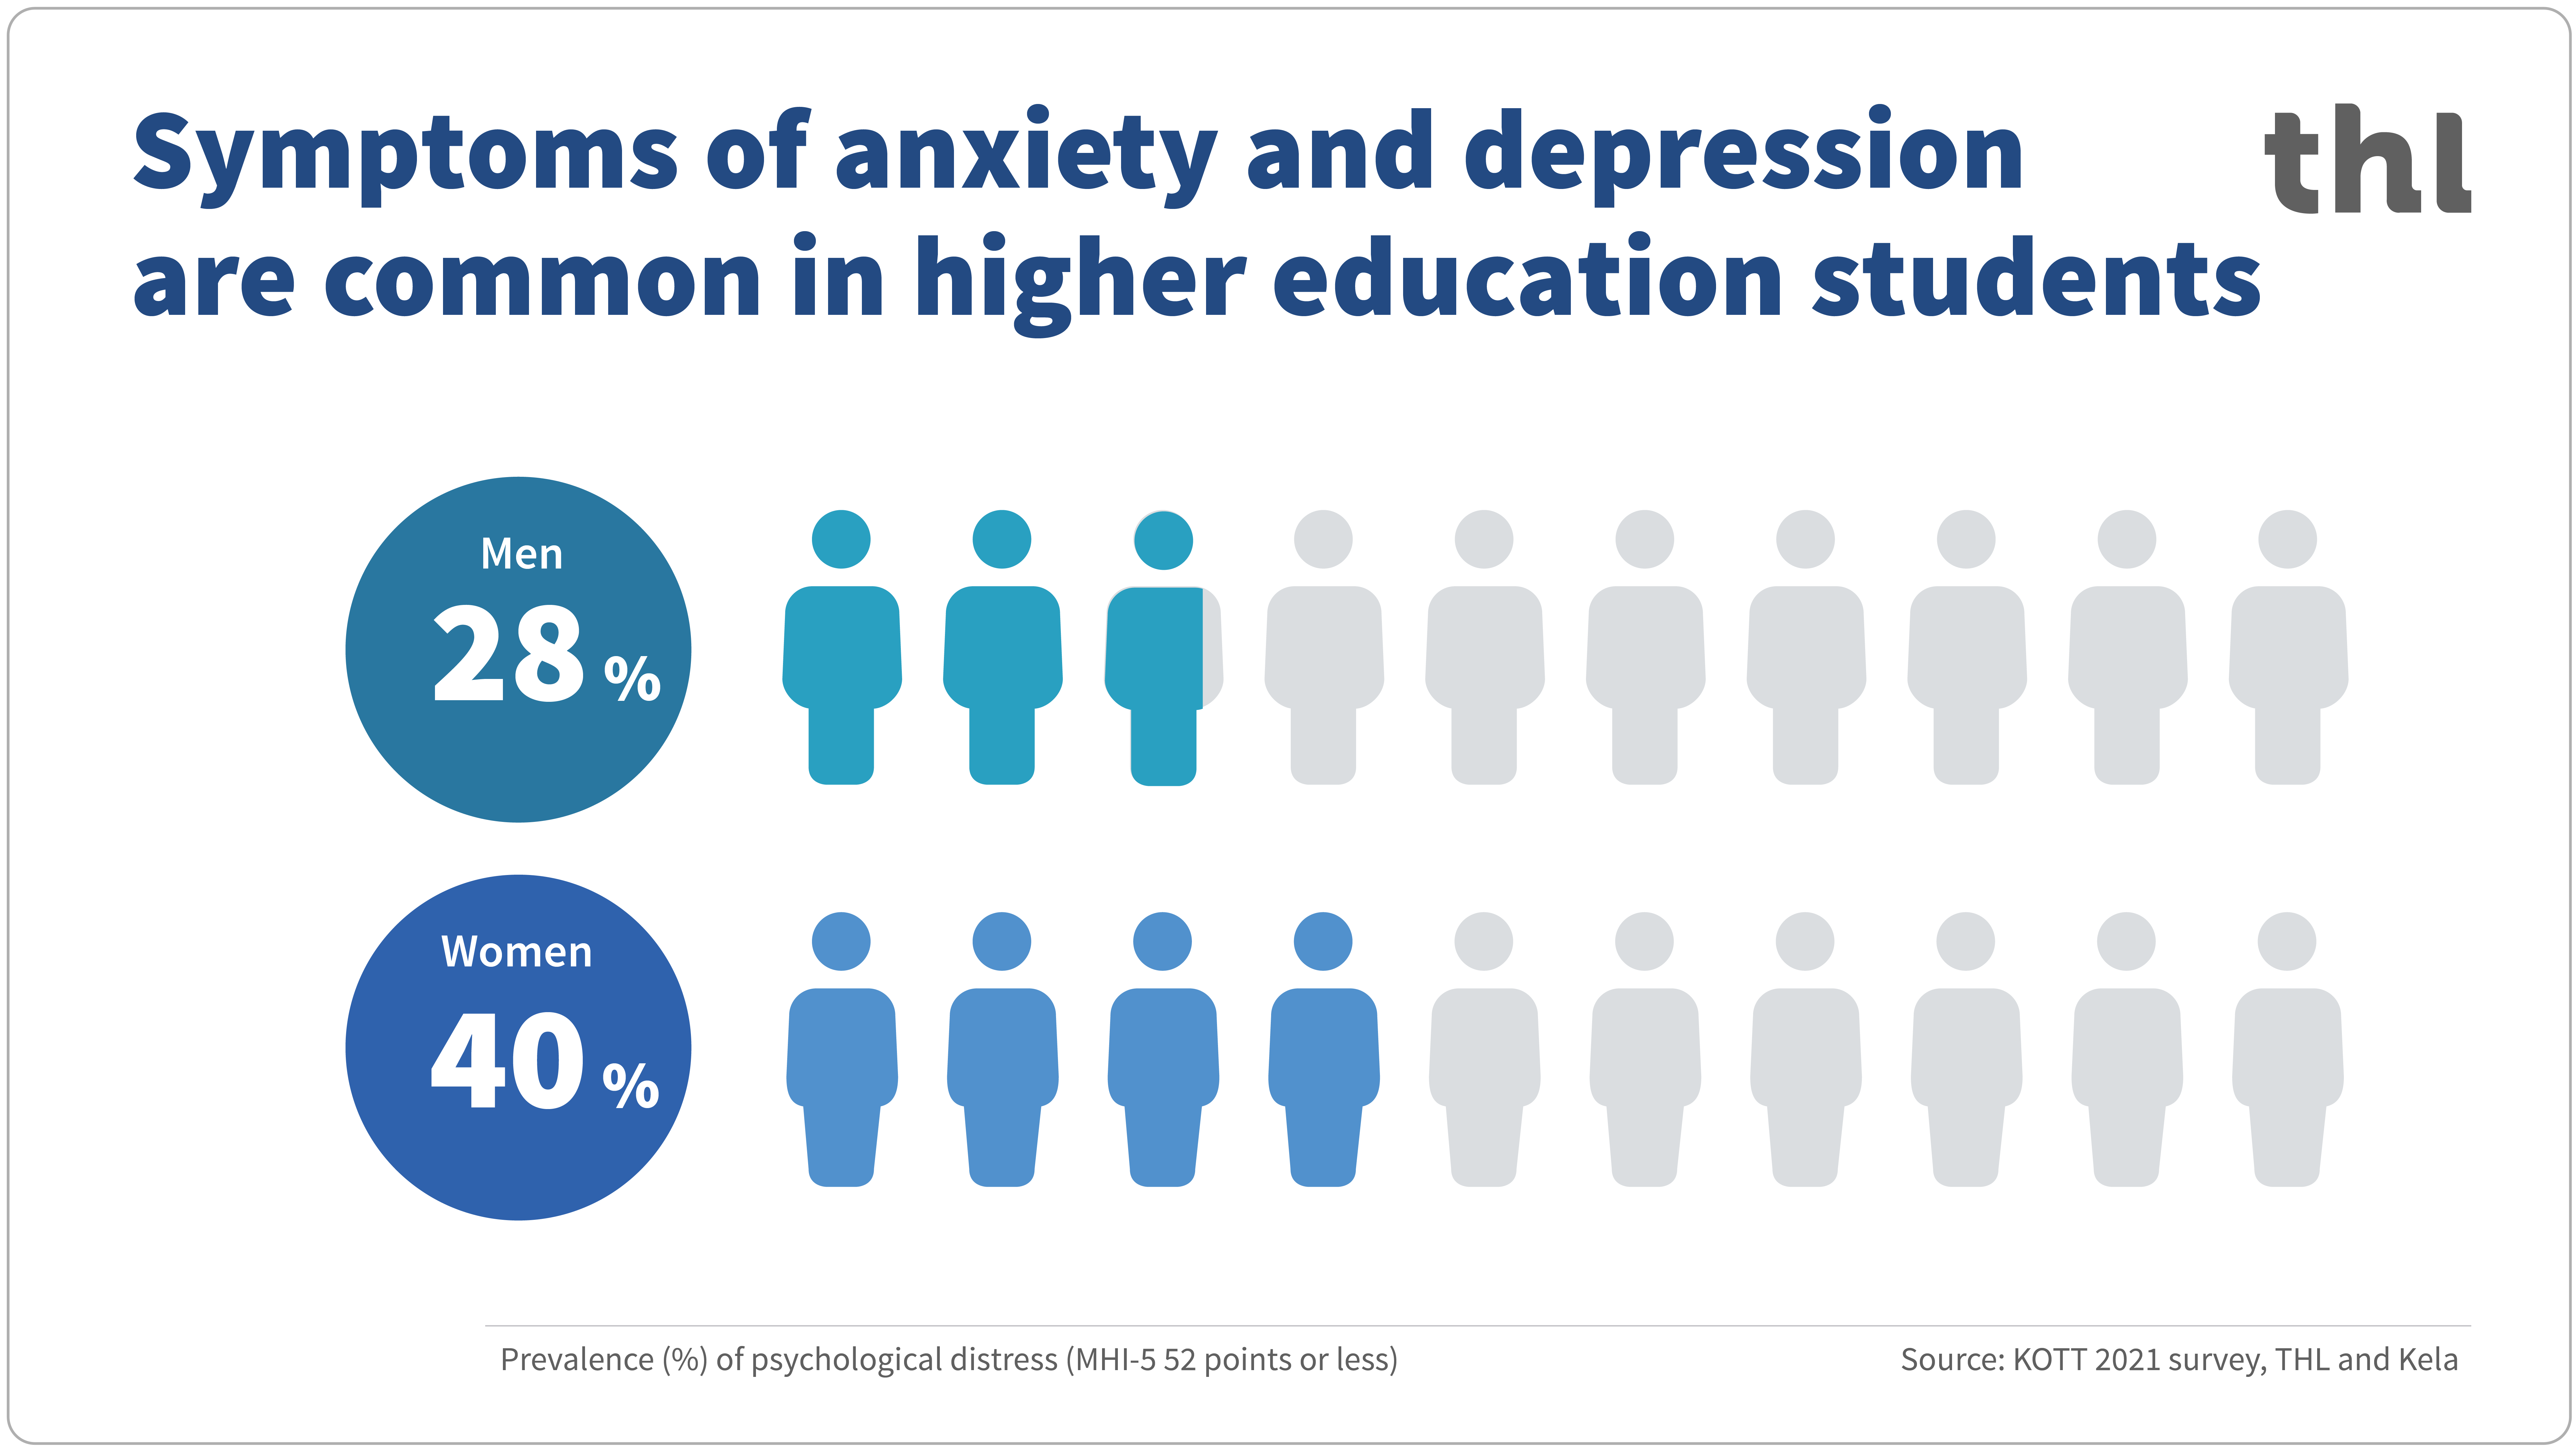 Symptoms of anxiety and depression are common in higher education students.